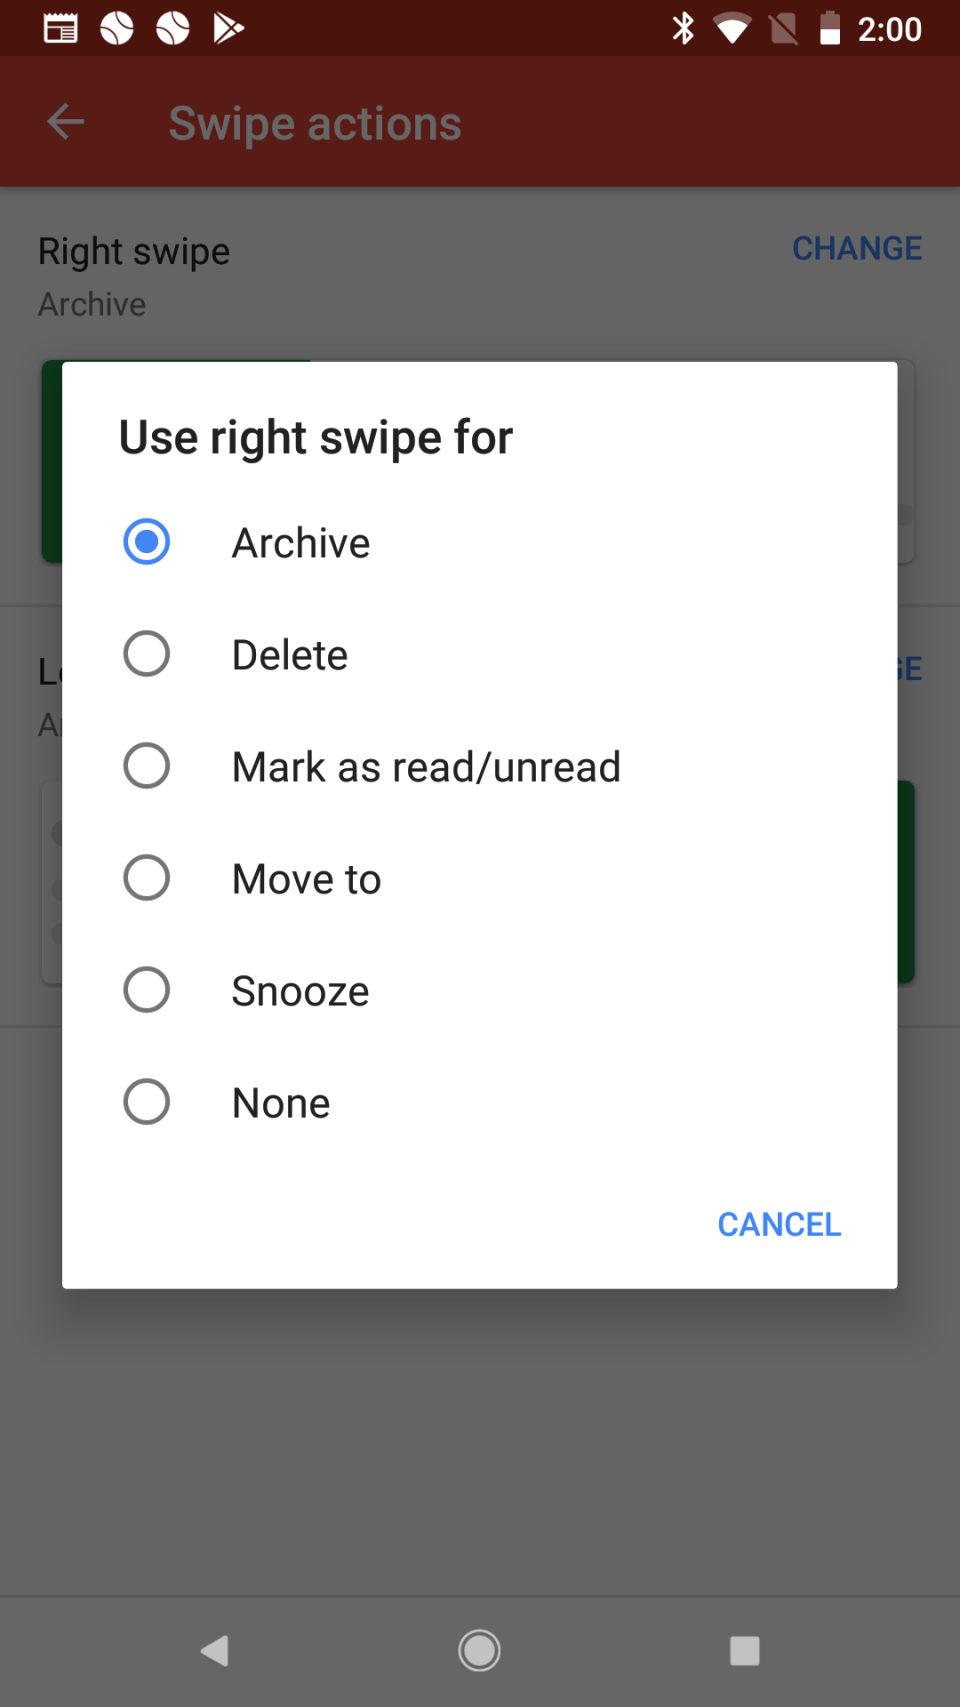 While swipe gestures to deal with your email have been around for some time,